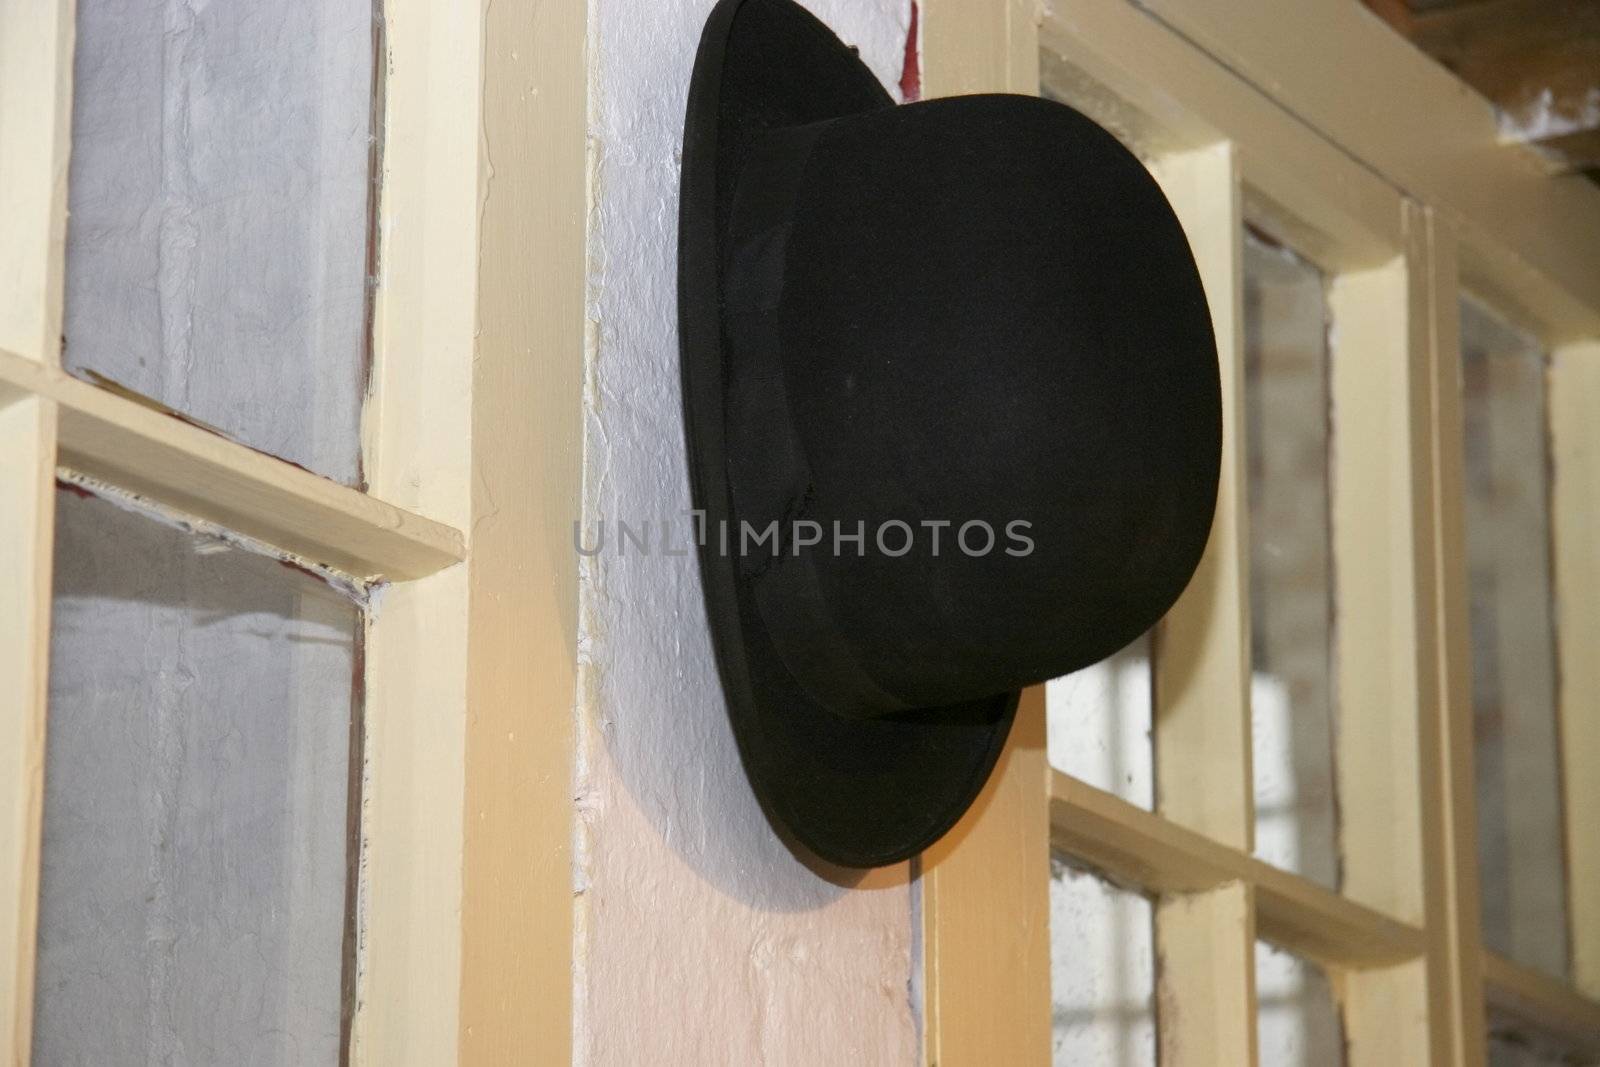 in the old days the supervisor wore a bowler hat, here it is hanging in his office